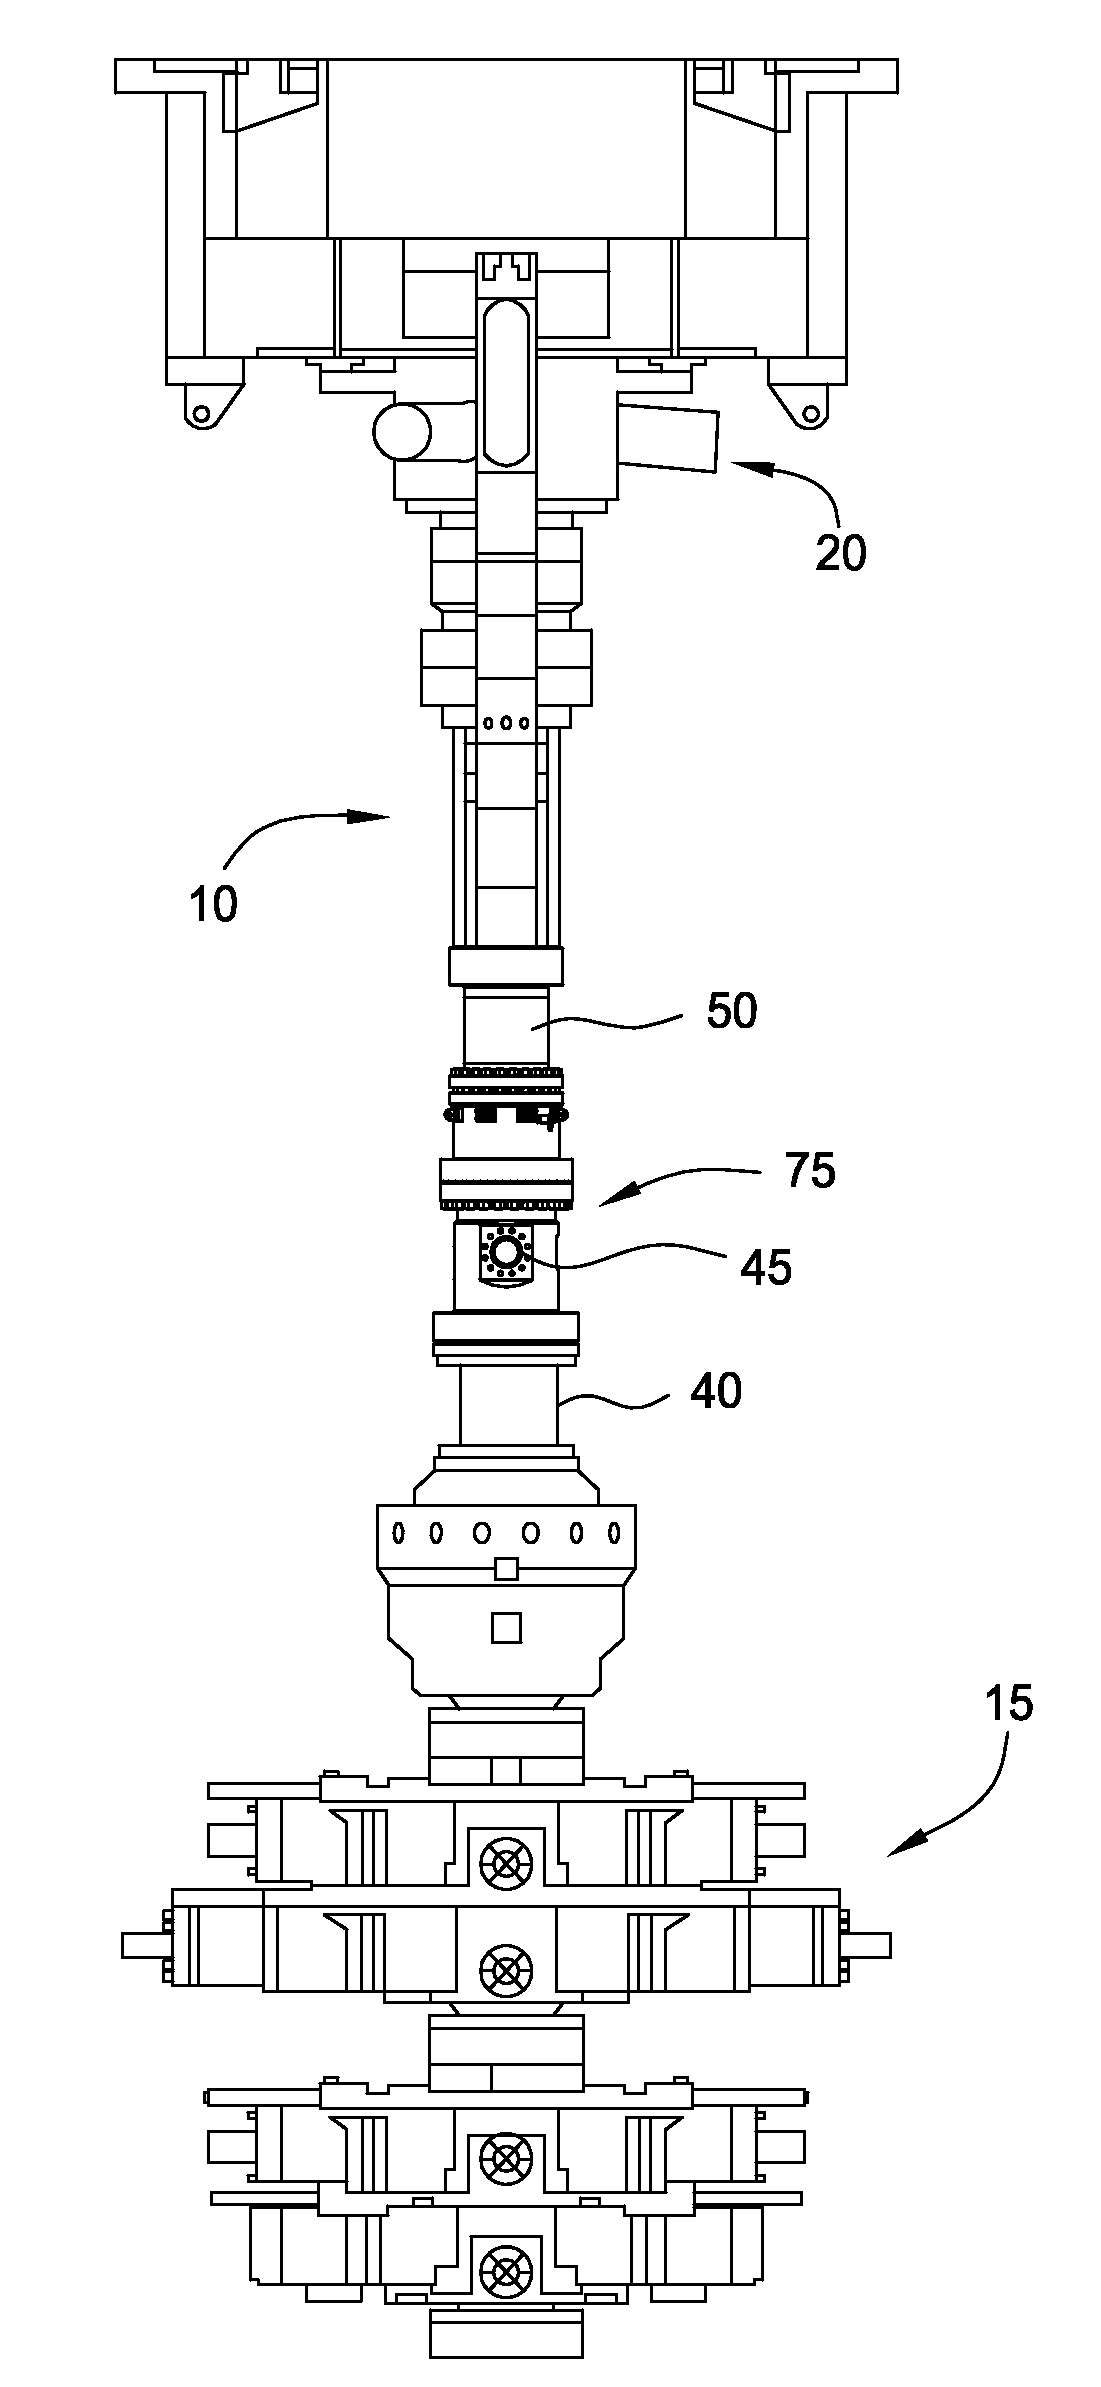 Apparatus and Method for Data Transmission from a Rotating Control Device